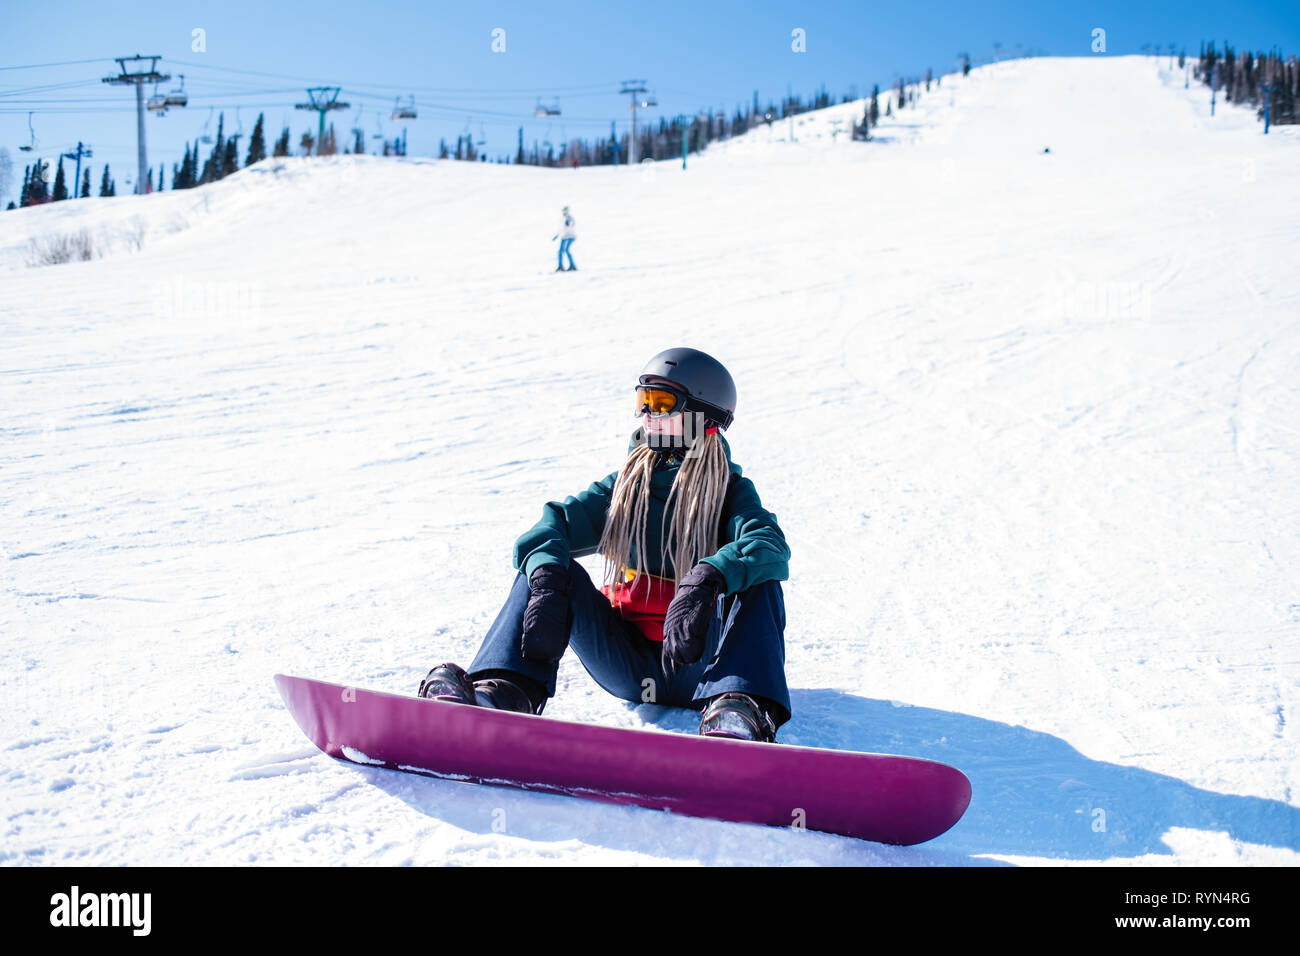 Young woman snowboarder sitting on a snowy slope. Stock Photo